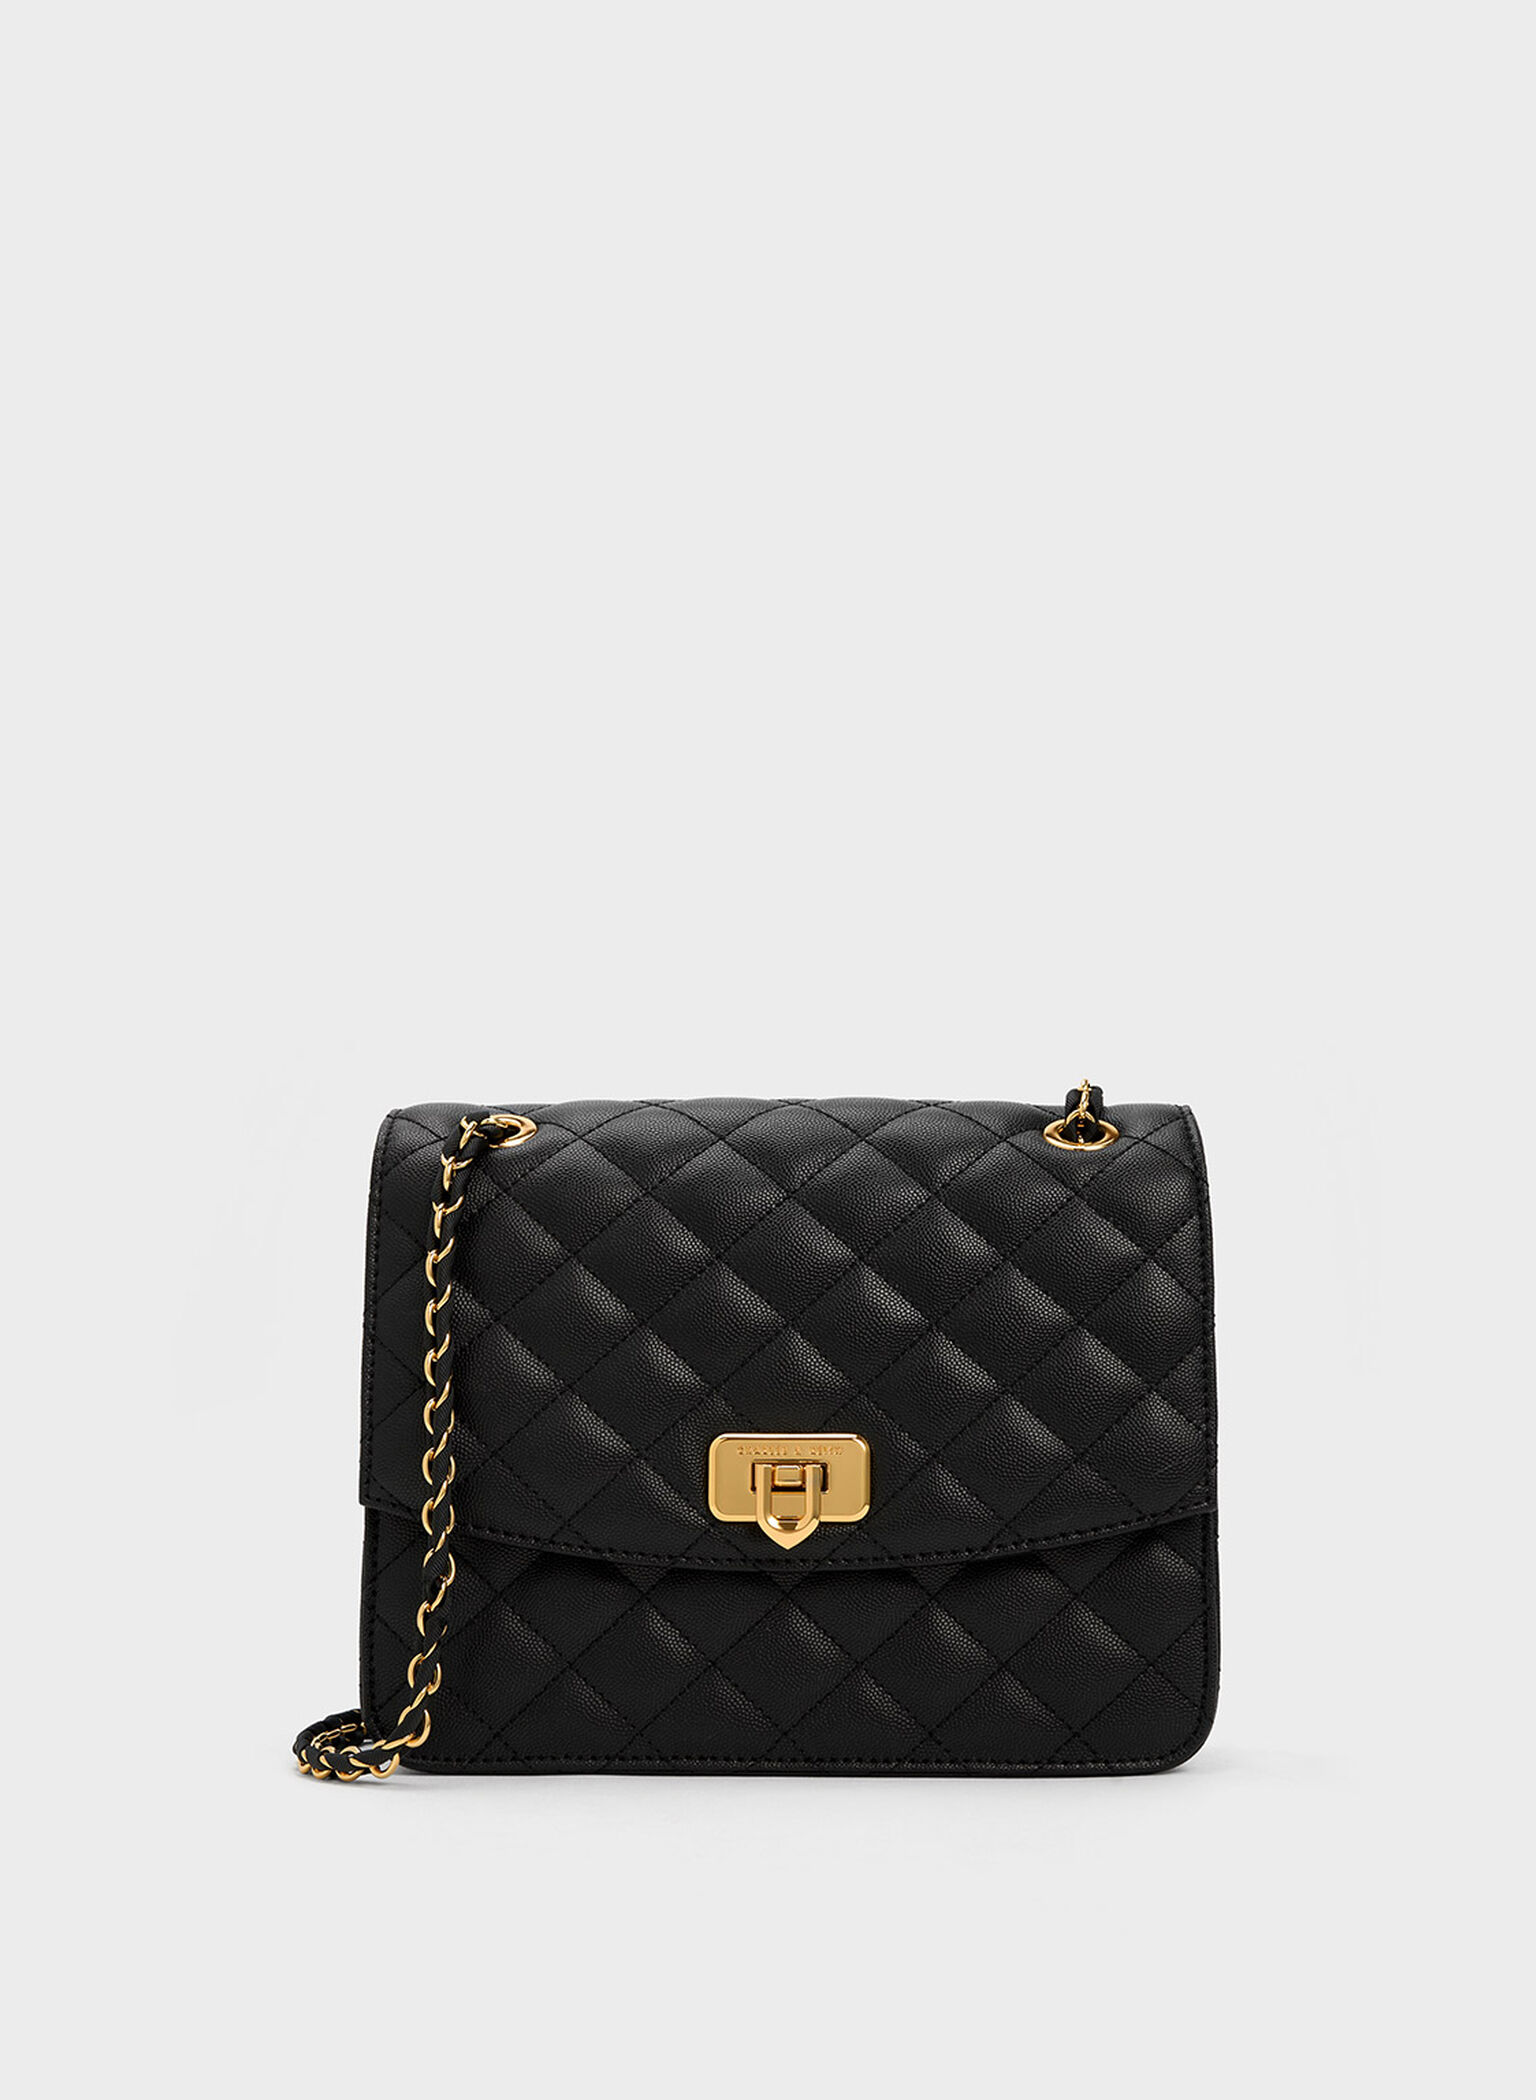 black quilted chanel purse